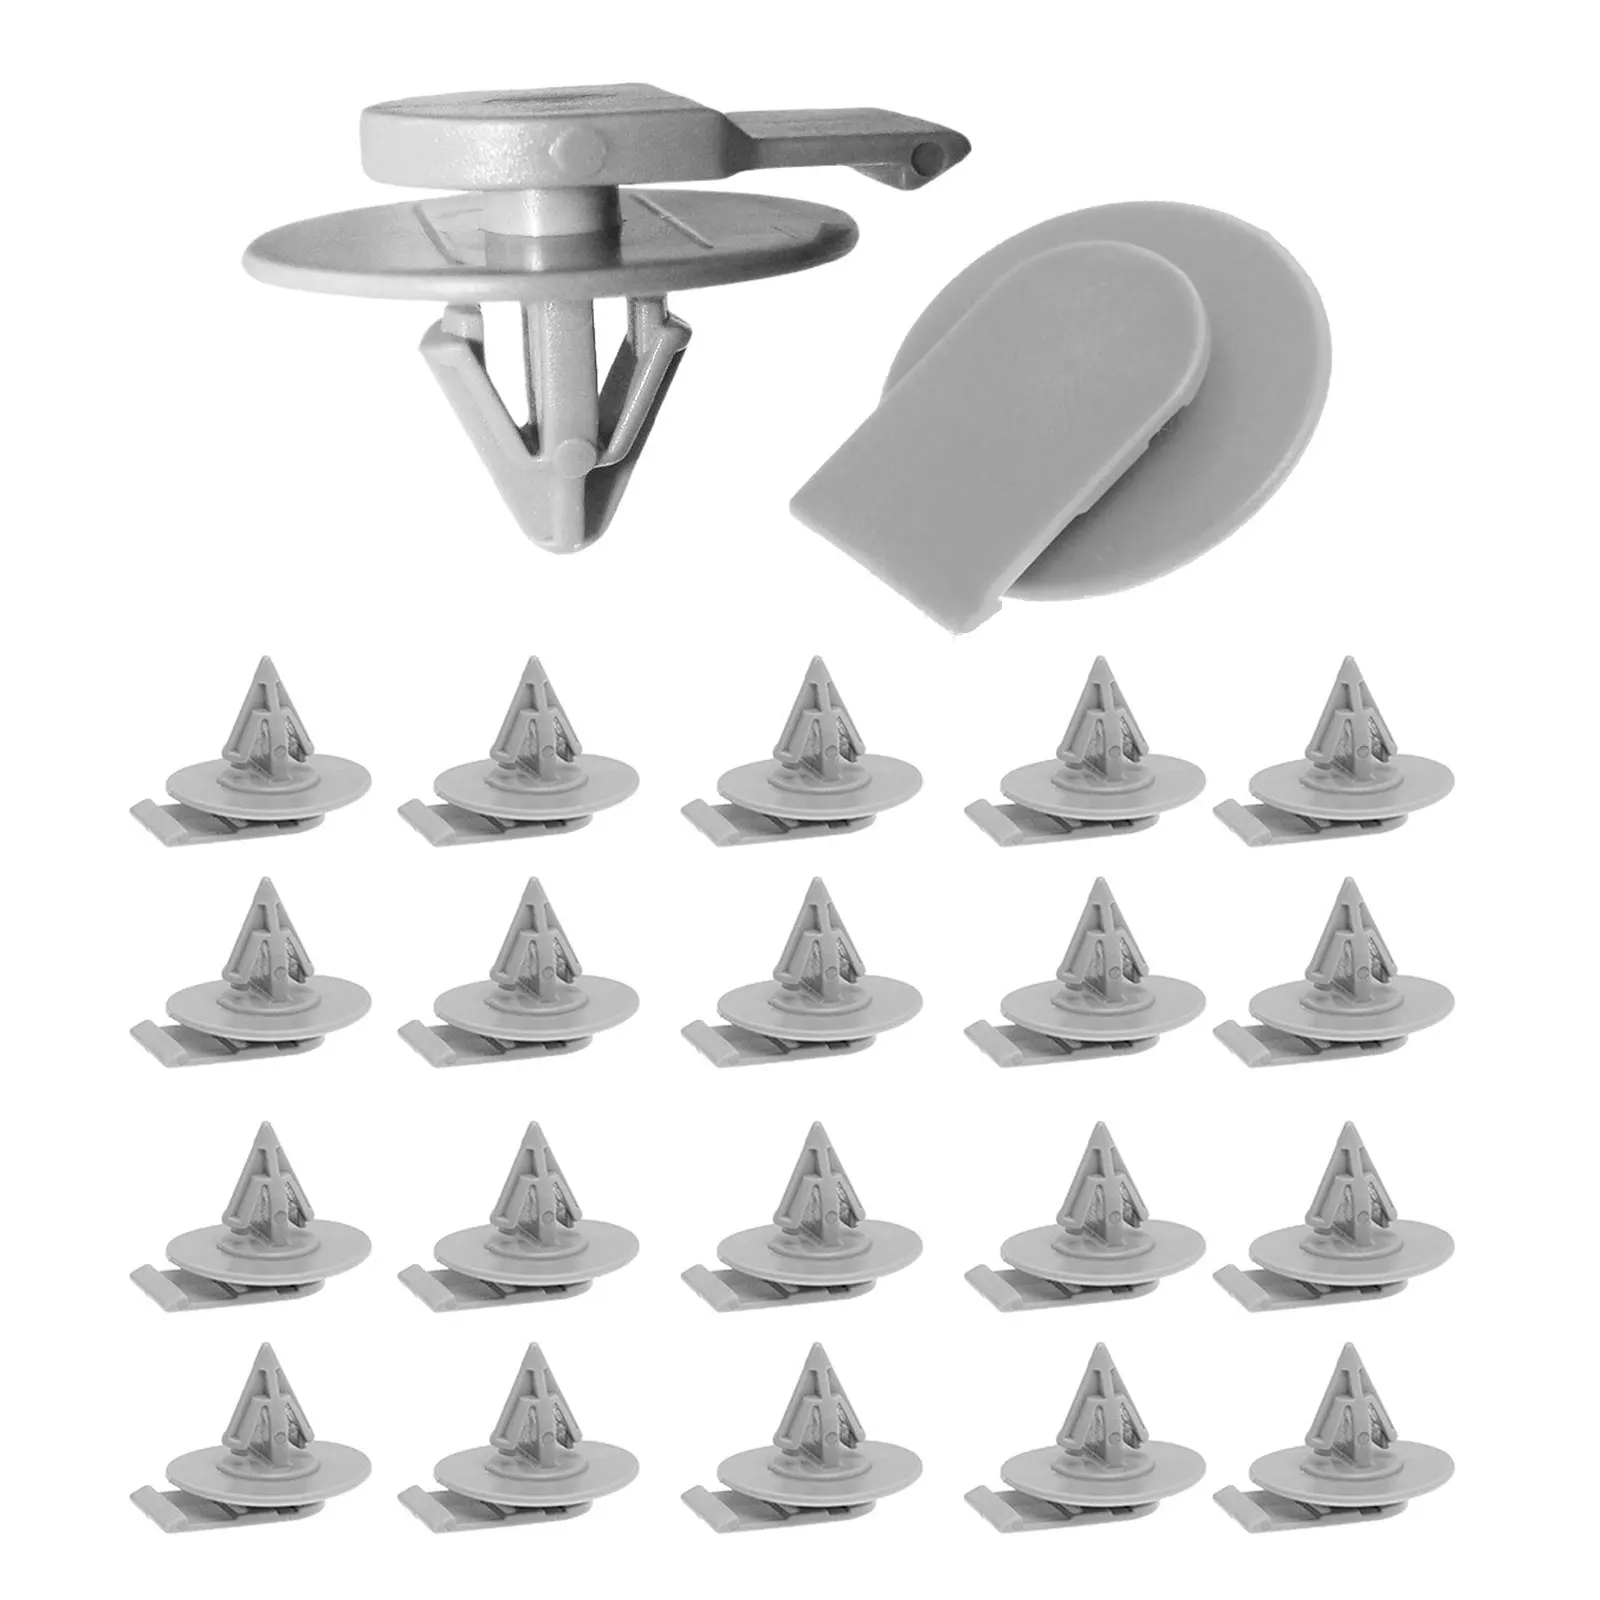 Pcs auto wheel arch trim clips fasteners grey retainers for bmw mini cooper r50 r52 r53 thumb200